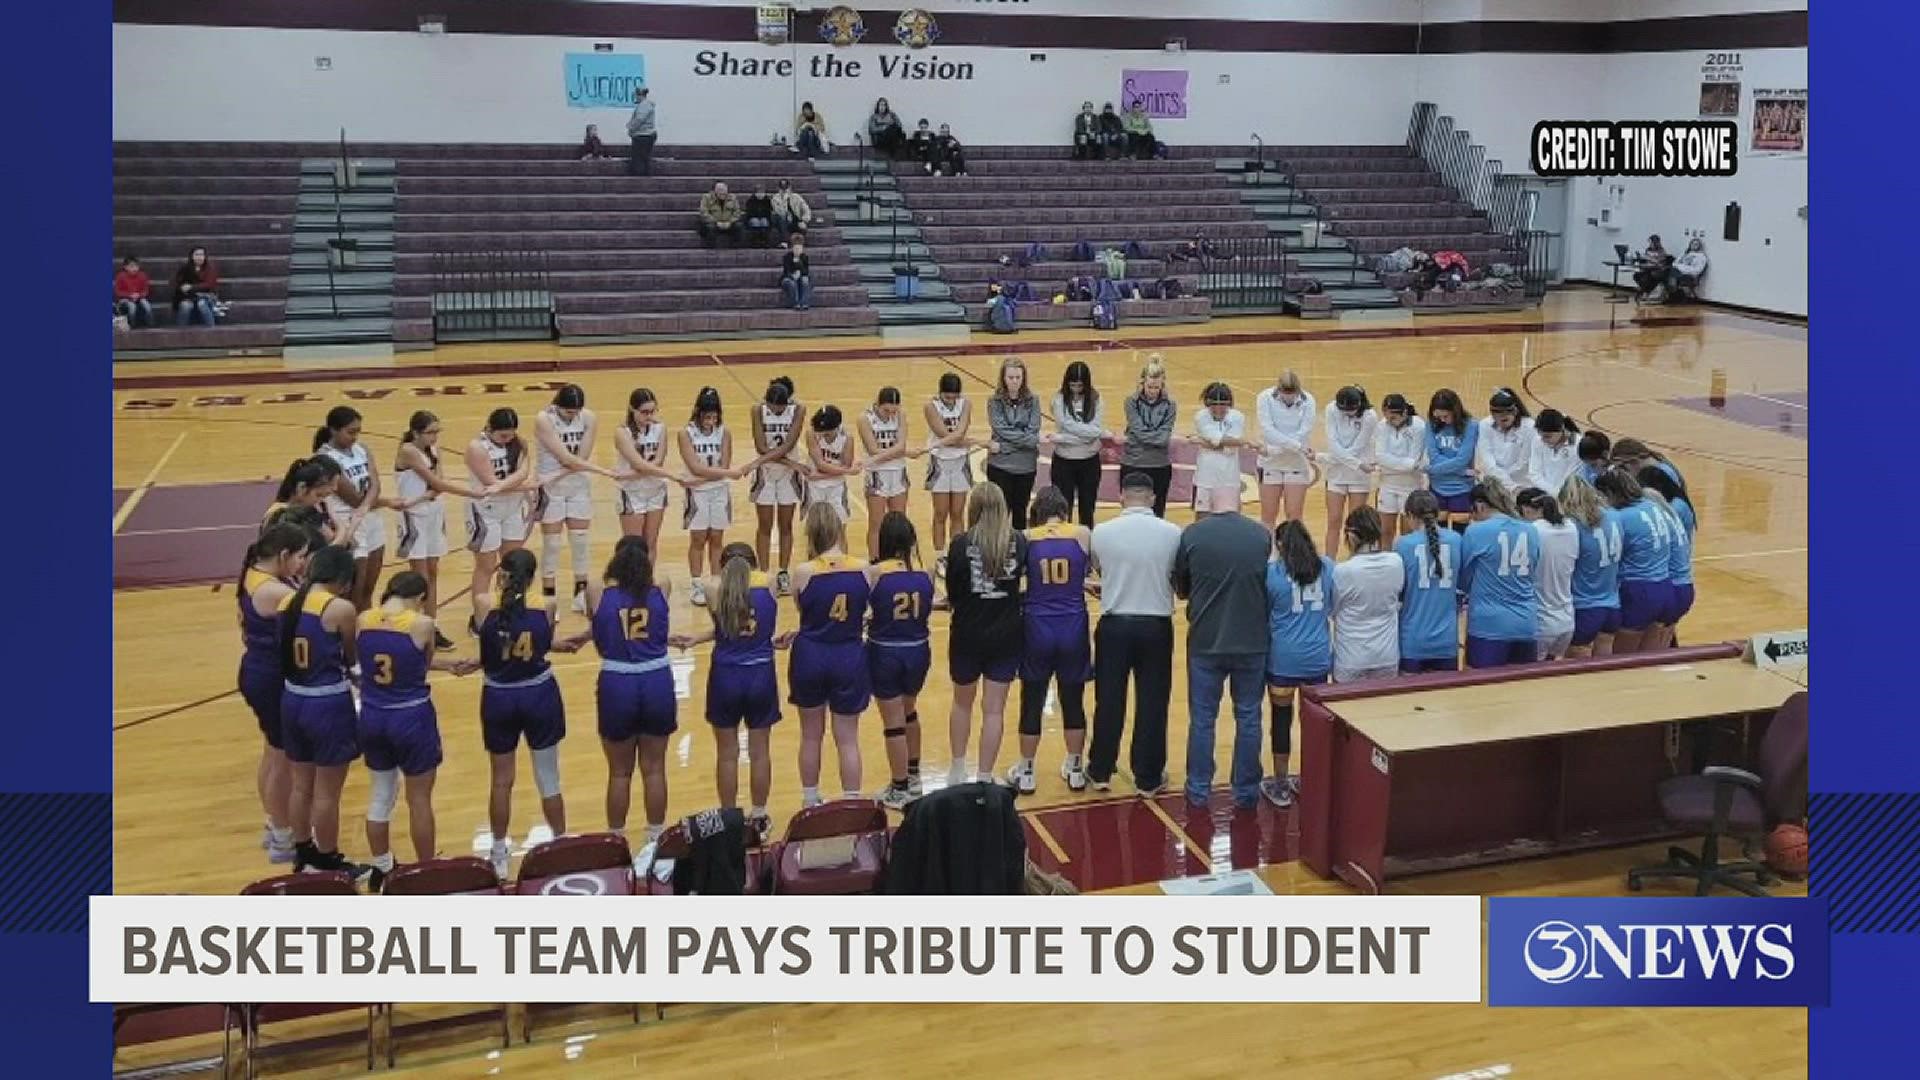 the Pirates coach led her team in honoring student athlete Kacy of Skidmore-Tynan -- by taking a knee and tying blue ribbons to their laces.